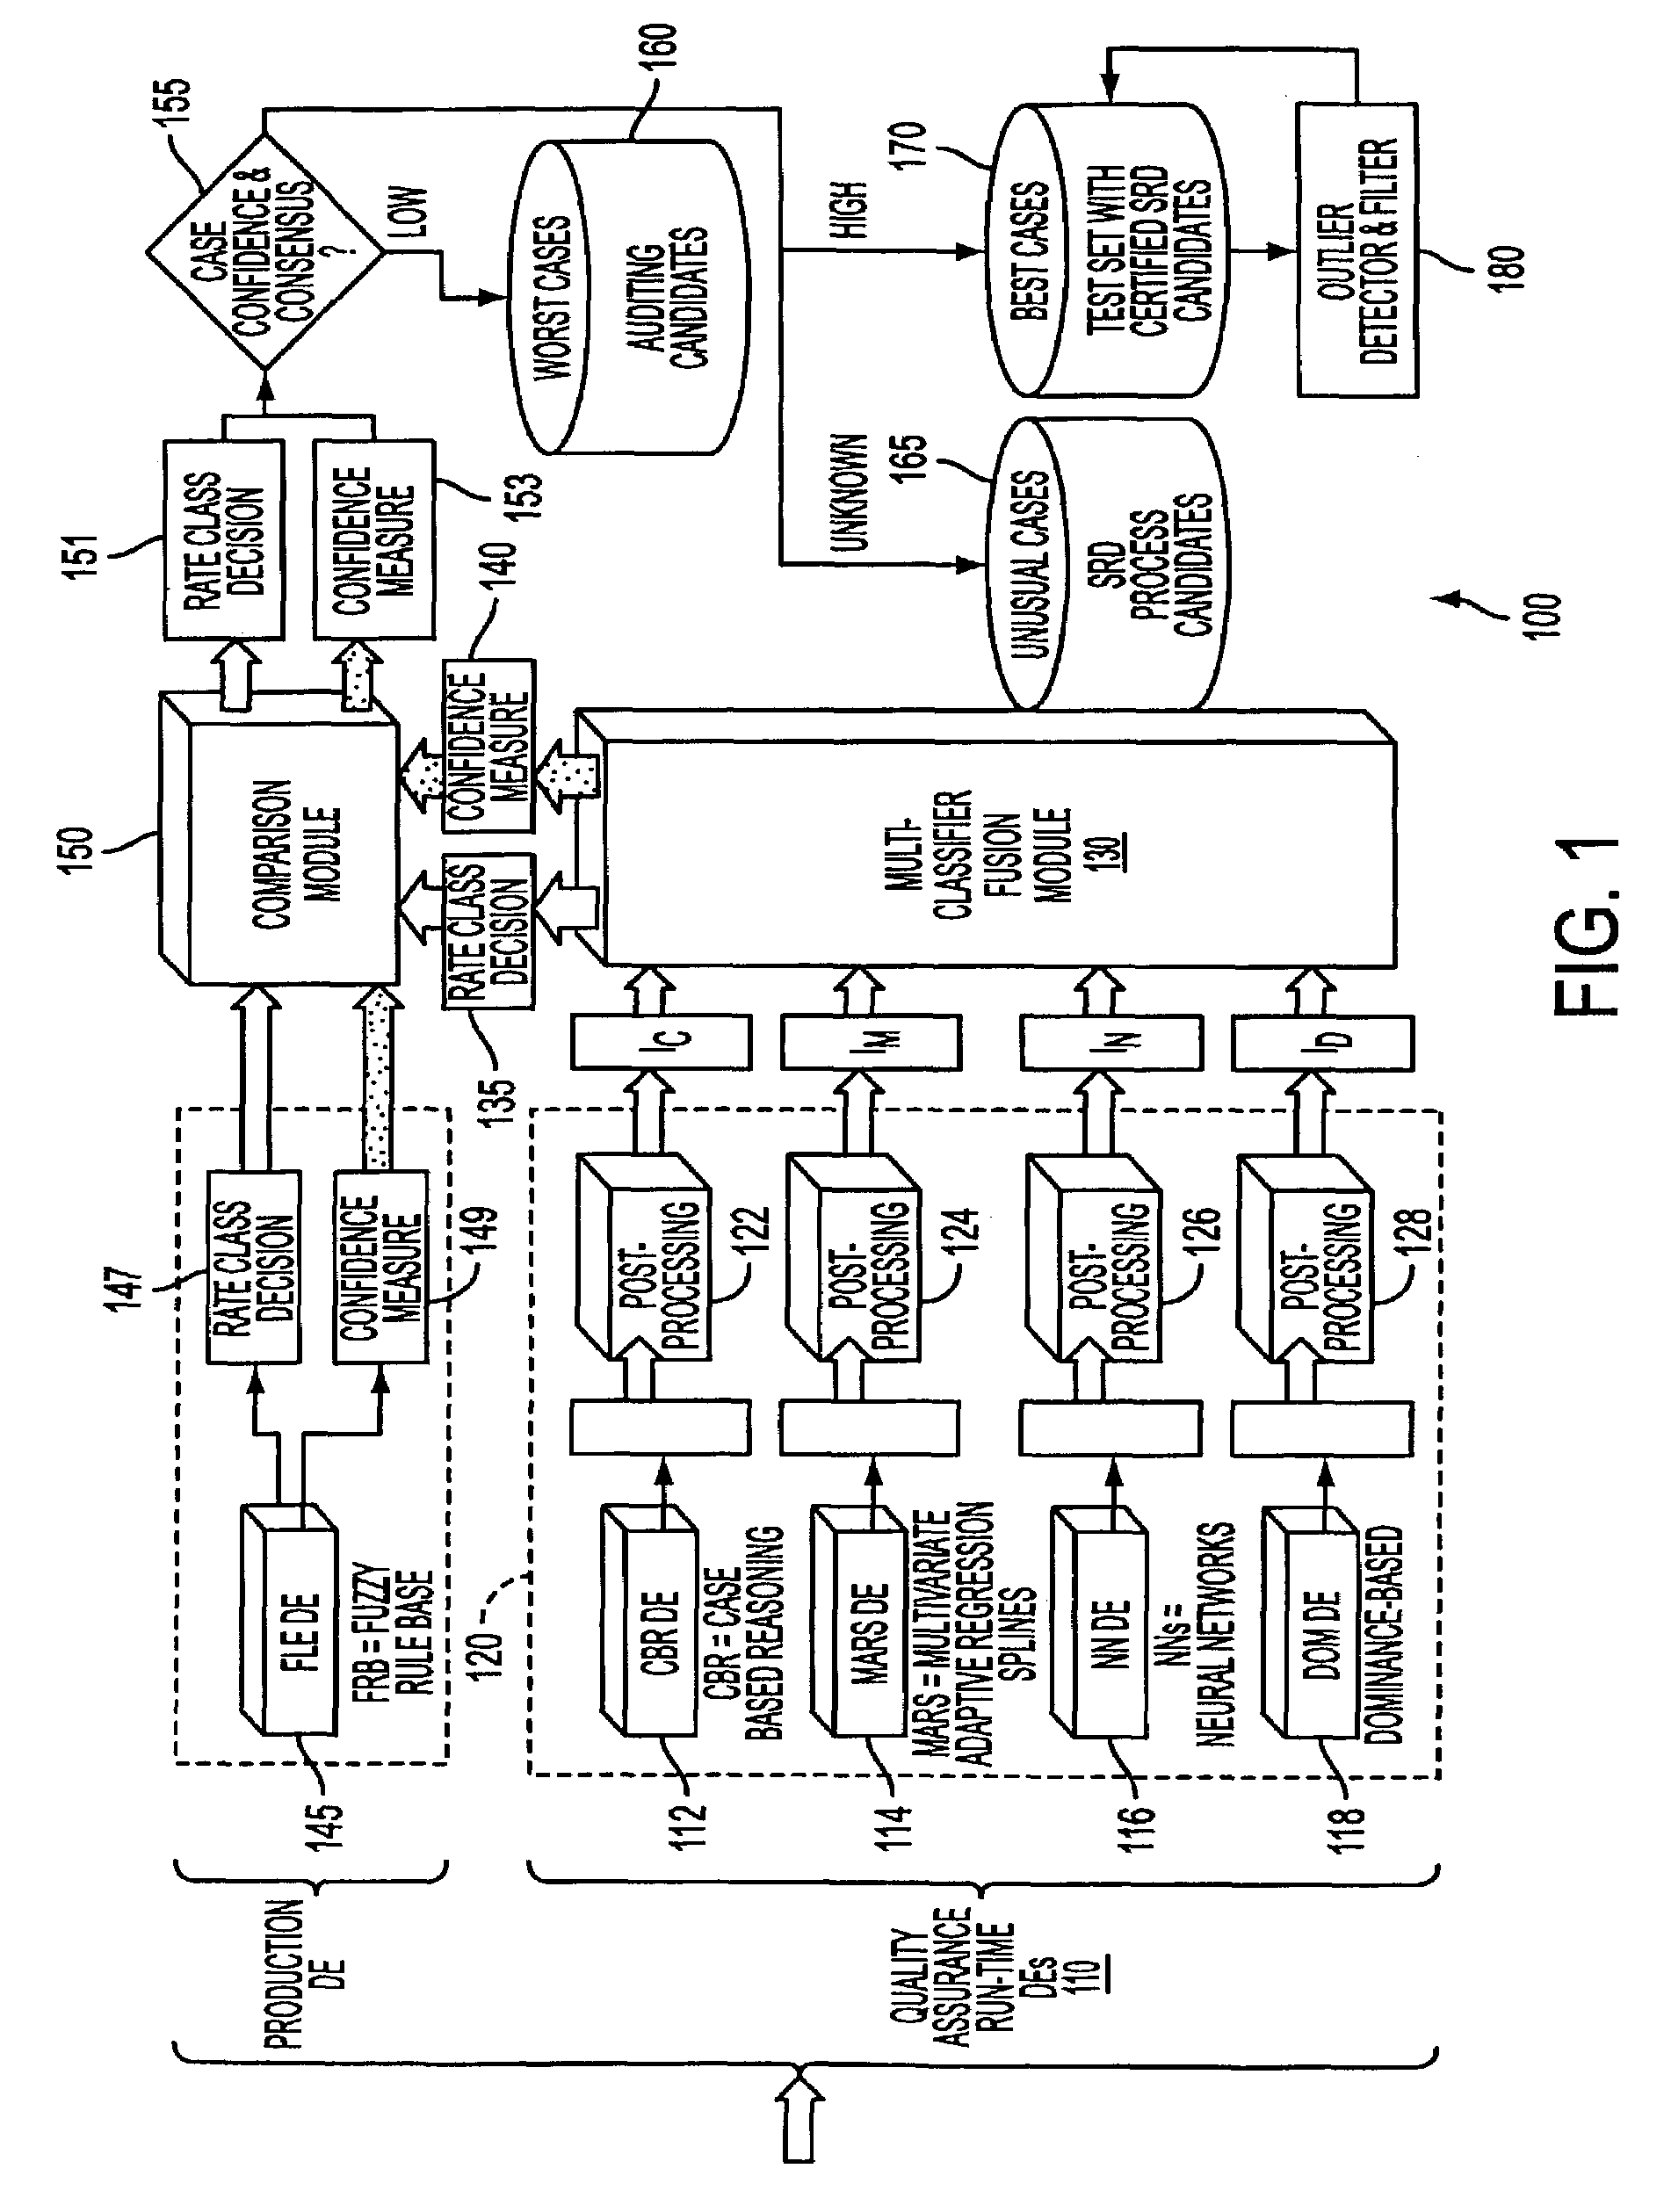 System and process for a fusion classification for insurance underwriting suitable for use by an automated system